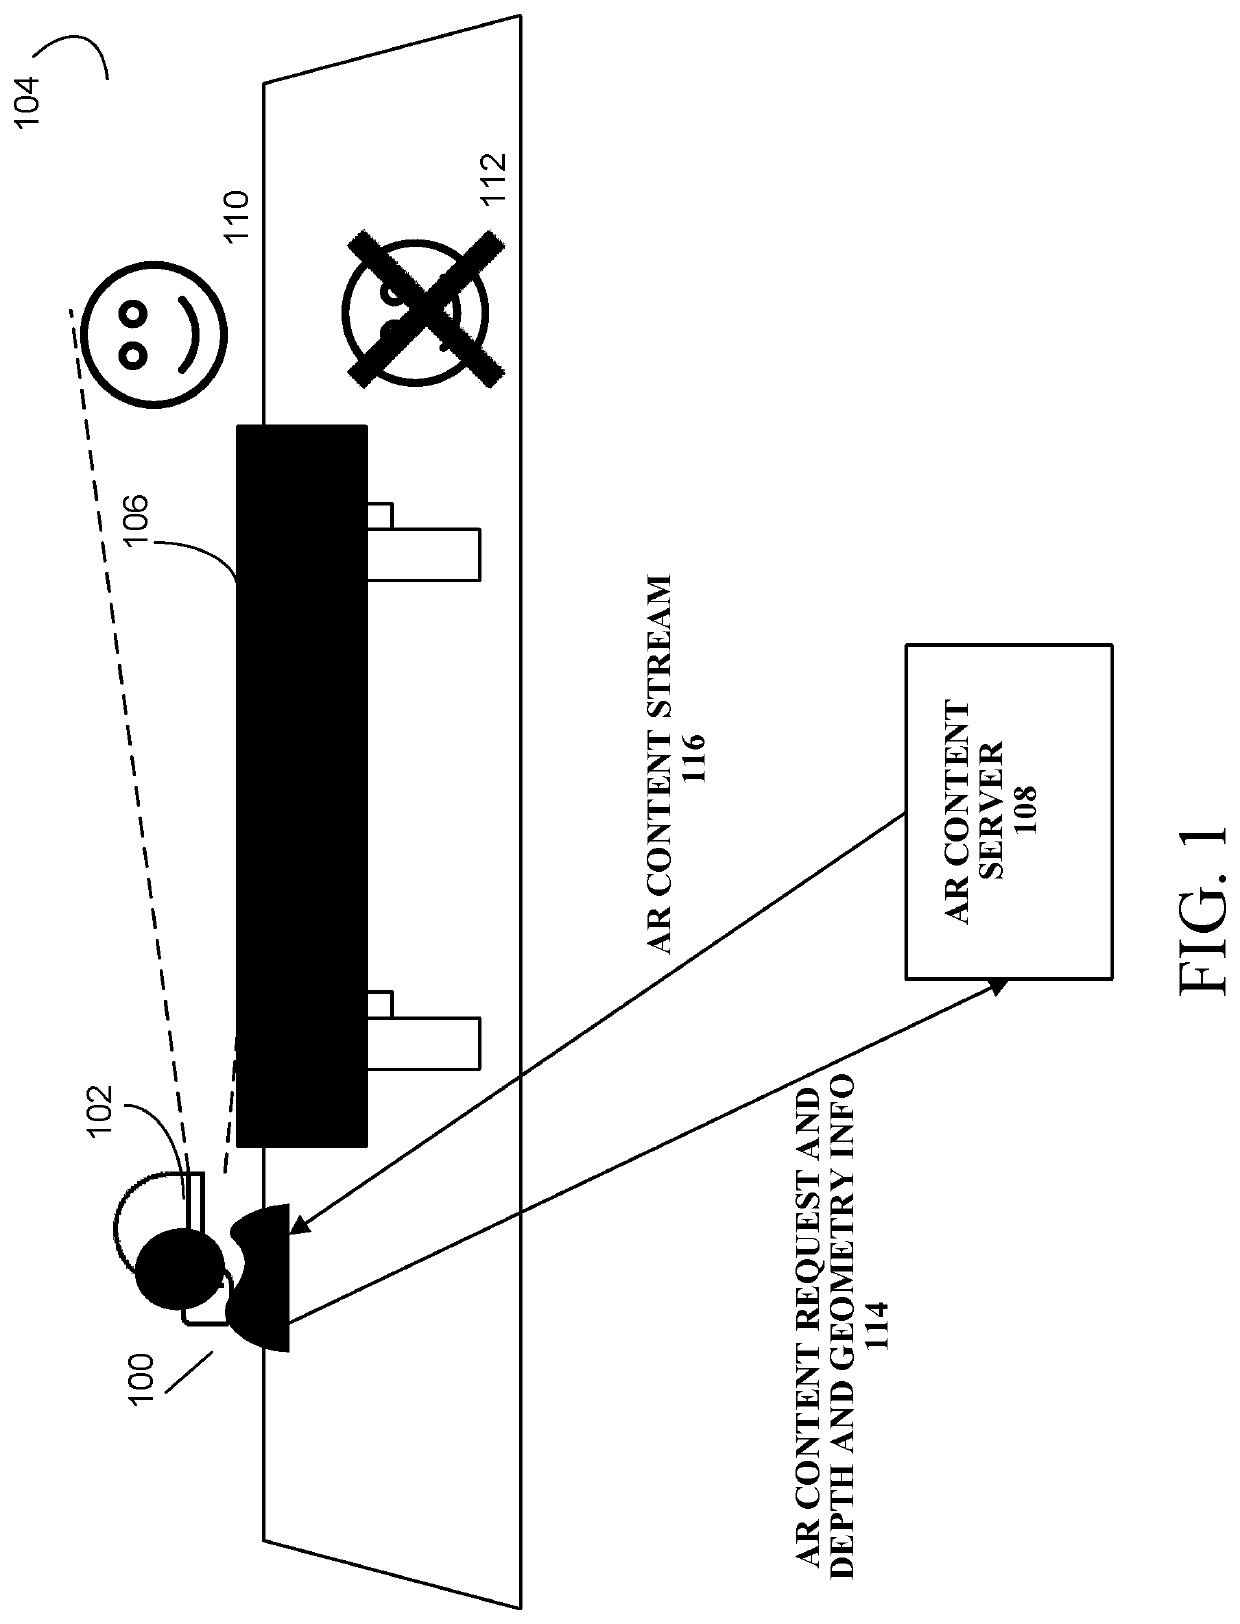 System and method for augmented reality content delivery in pre-captured environments